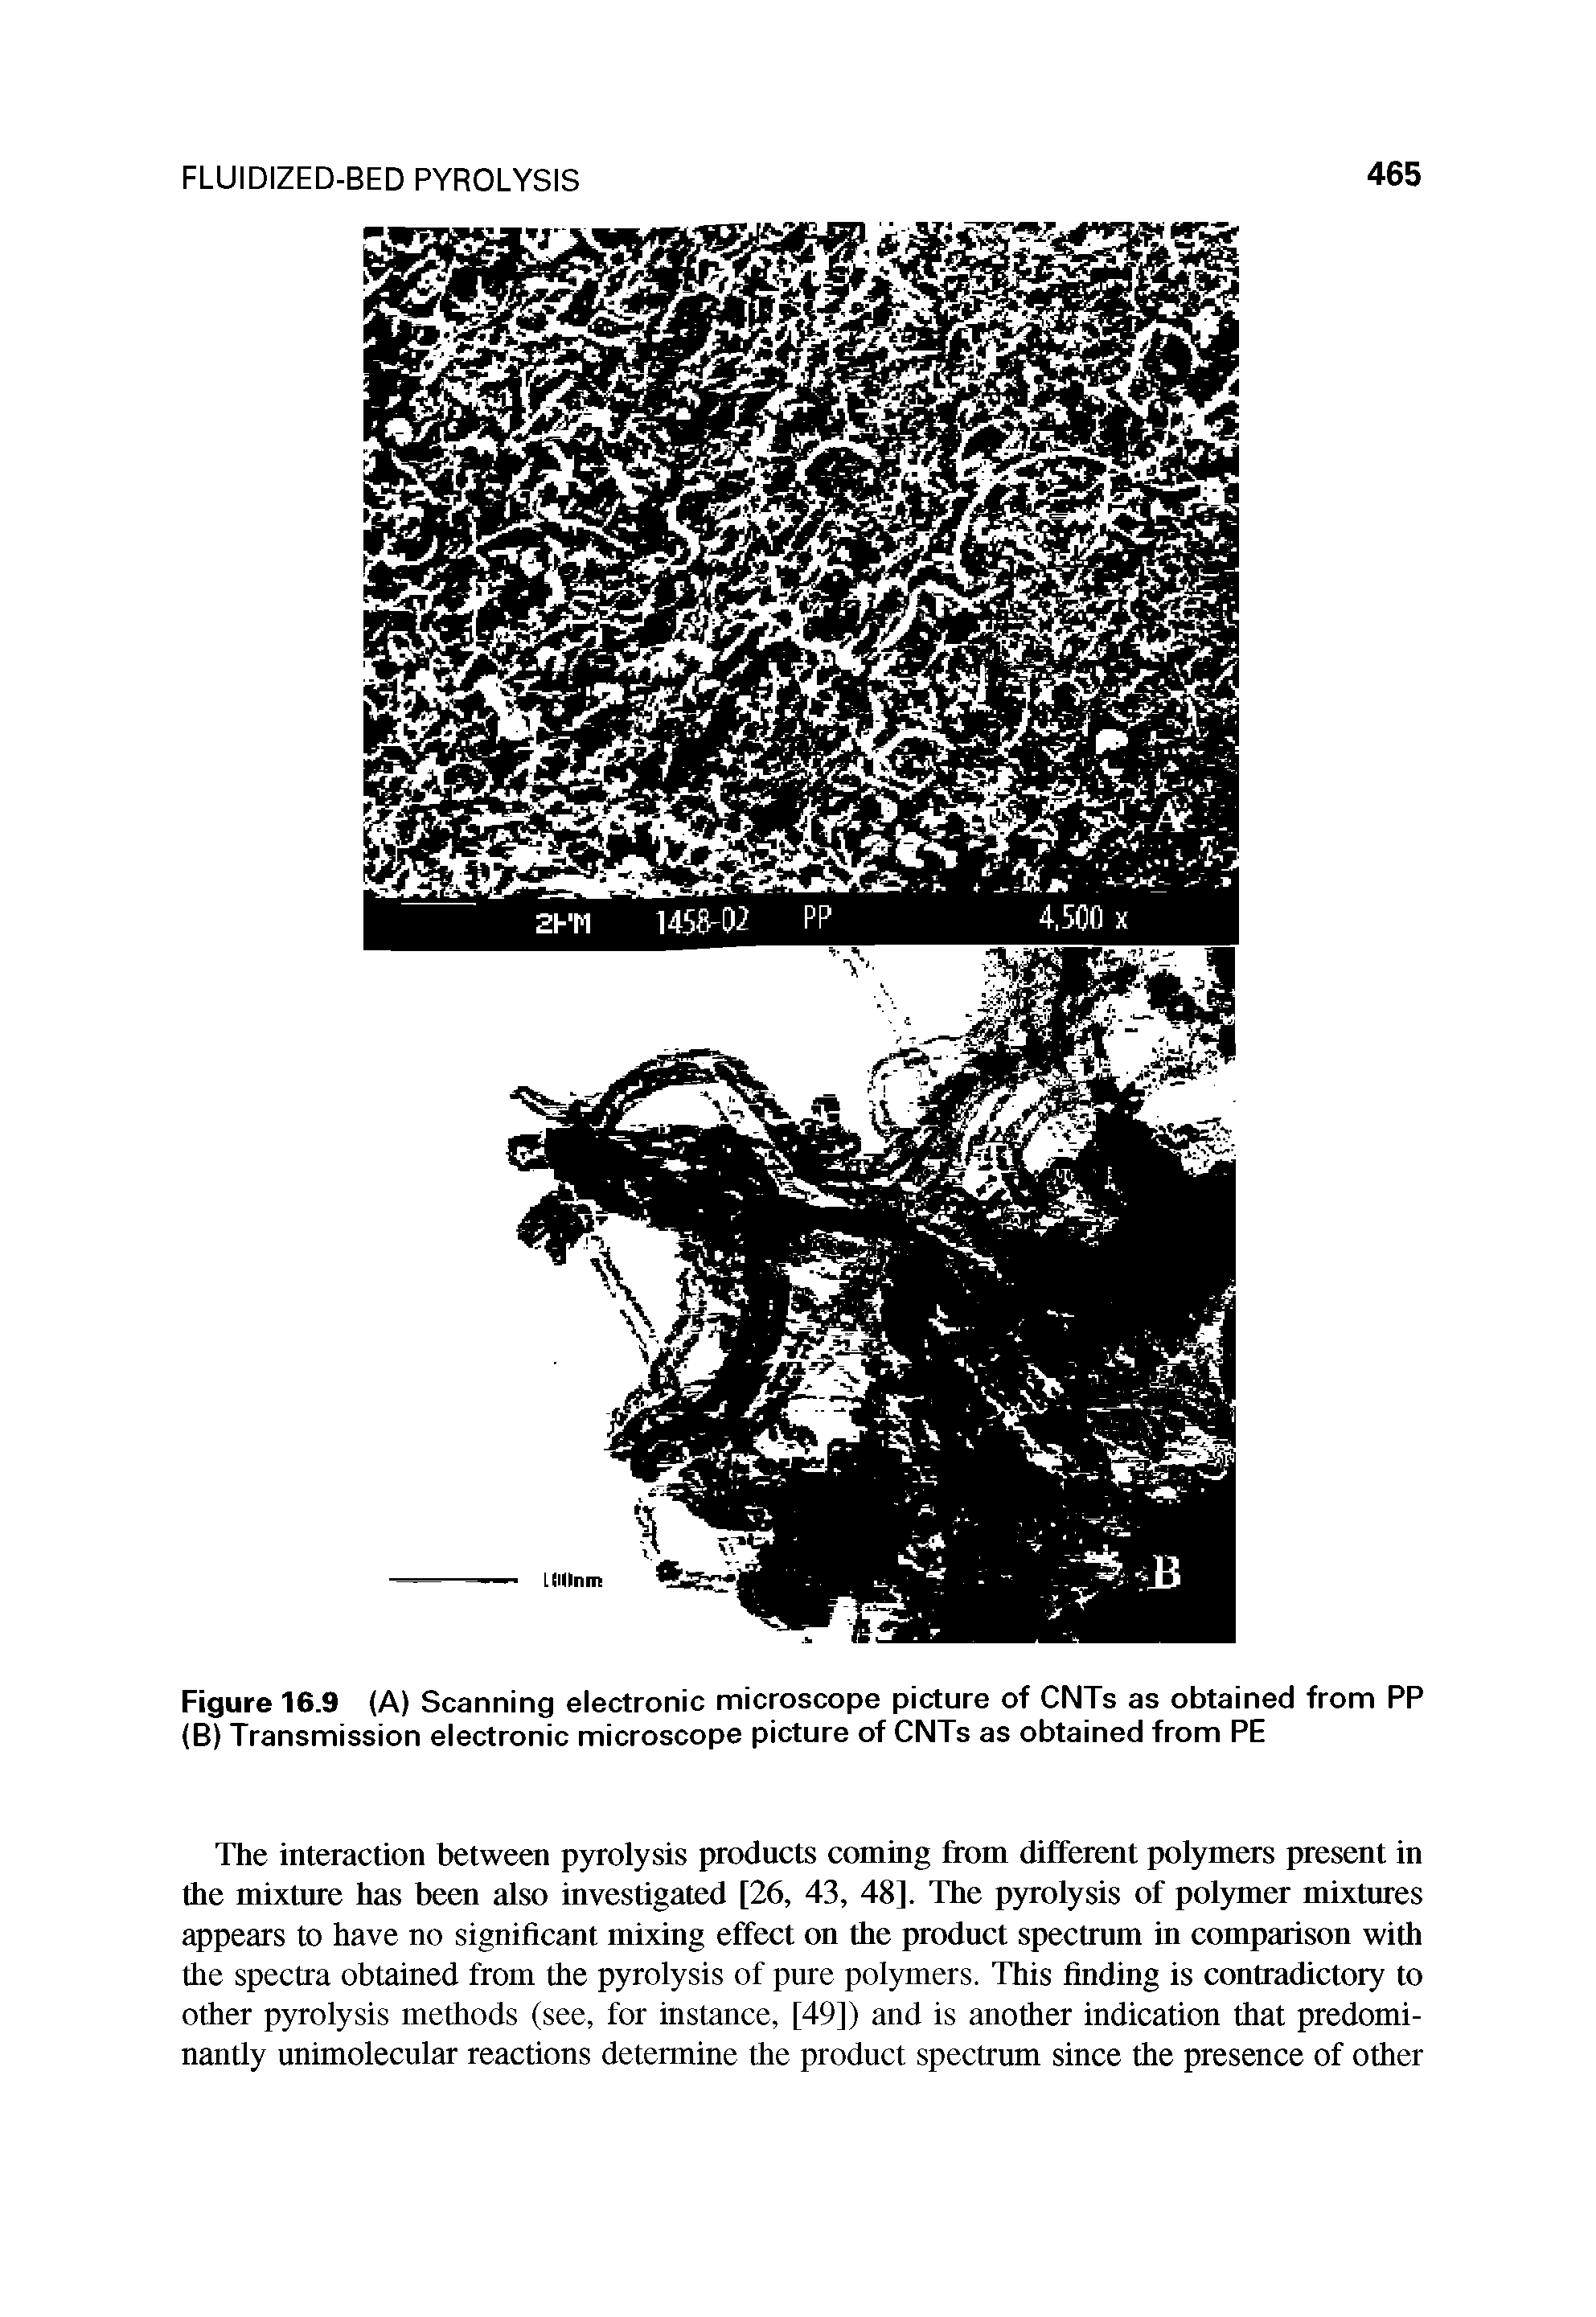 Figure 16.9 (A) Scanning electronic microscope picture of CNTs as obtained from PP (B) Transmission electronic microscope picture of CNTs as obtained from PE...